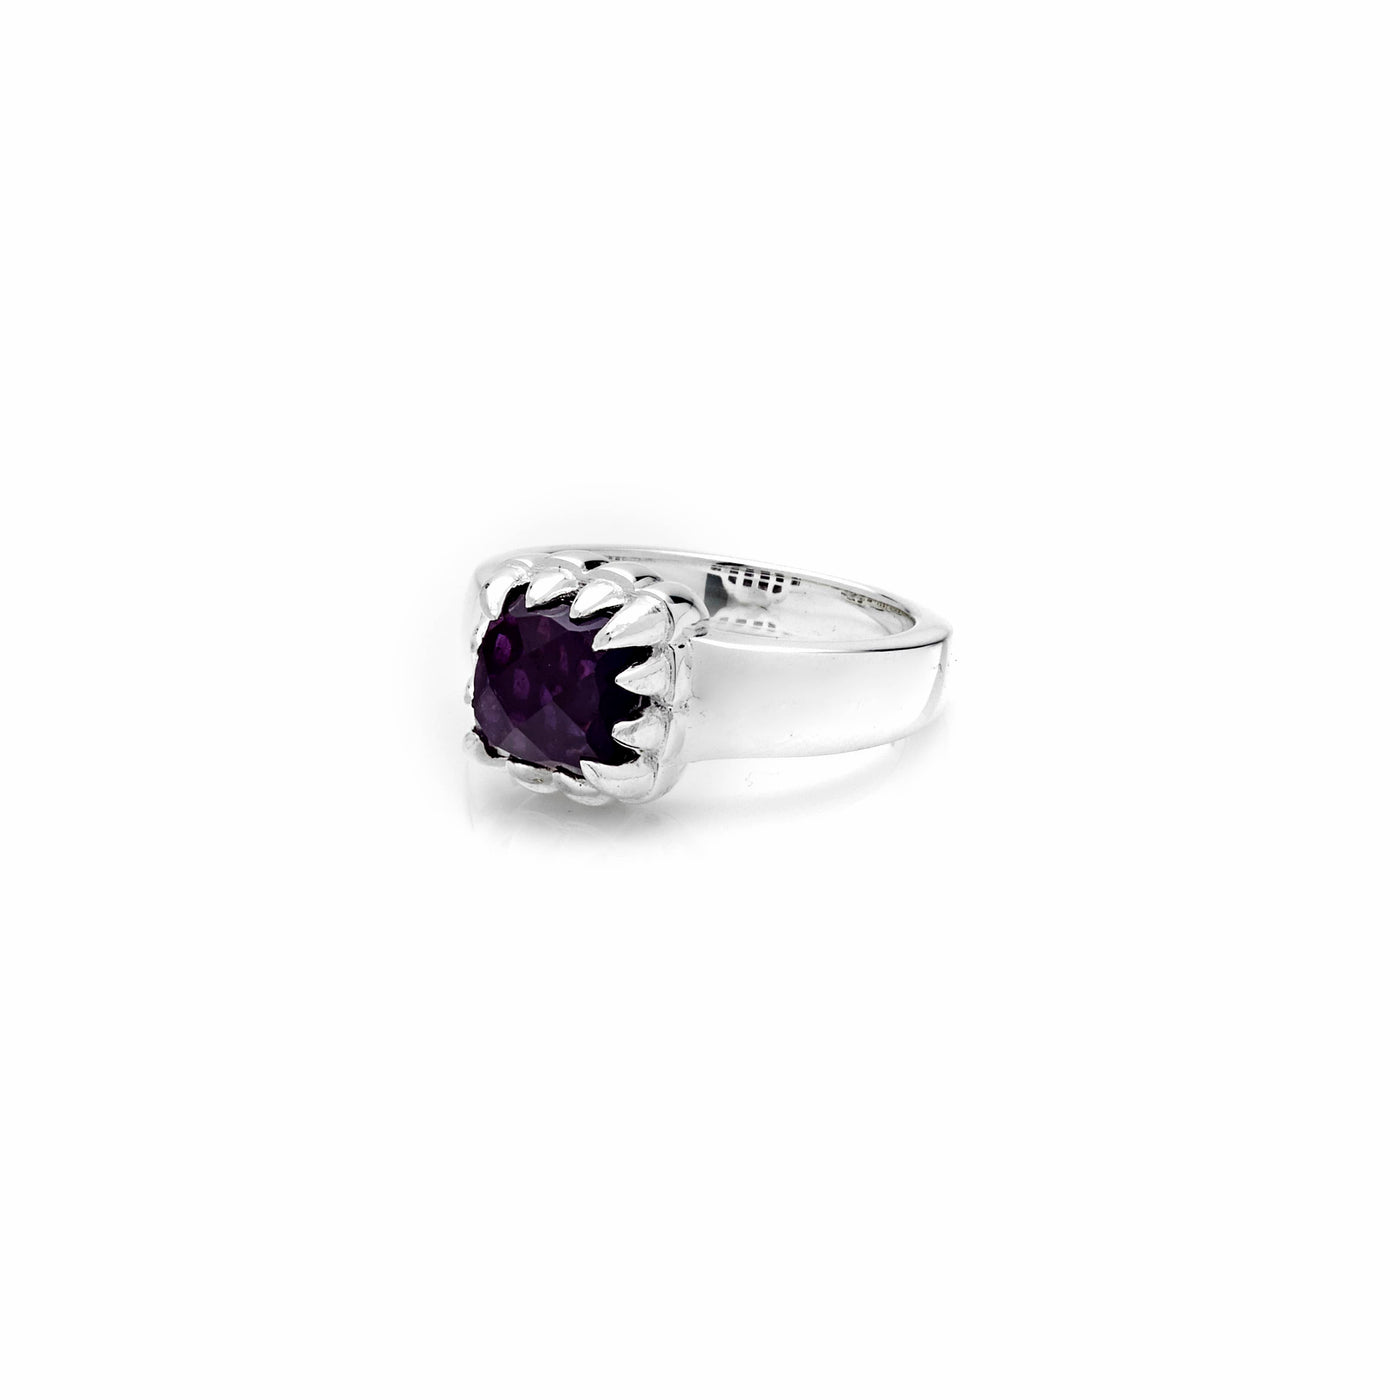 STOLEN GIRLFRIENDS CLUB BABY CLAW RING  The Stolen Girlfriends Club Baby Claw Ring is now available in Purple Amethyst, Black Onyx, Yellow Citrine and Rose Quartz   The Baby Claw Ring features a thick band, holding a Purple Amethyst, Black Onyx, Yellow Citrine or Rose Quartz heart charm, which is held in place by the silver claw.  The Stolen Girlfriends Club Baby Claw Ring 